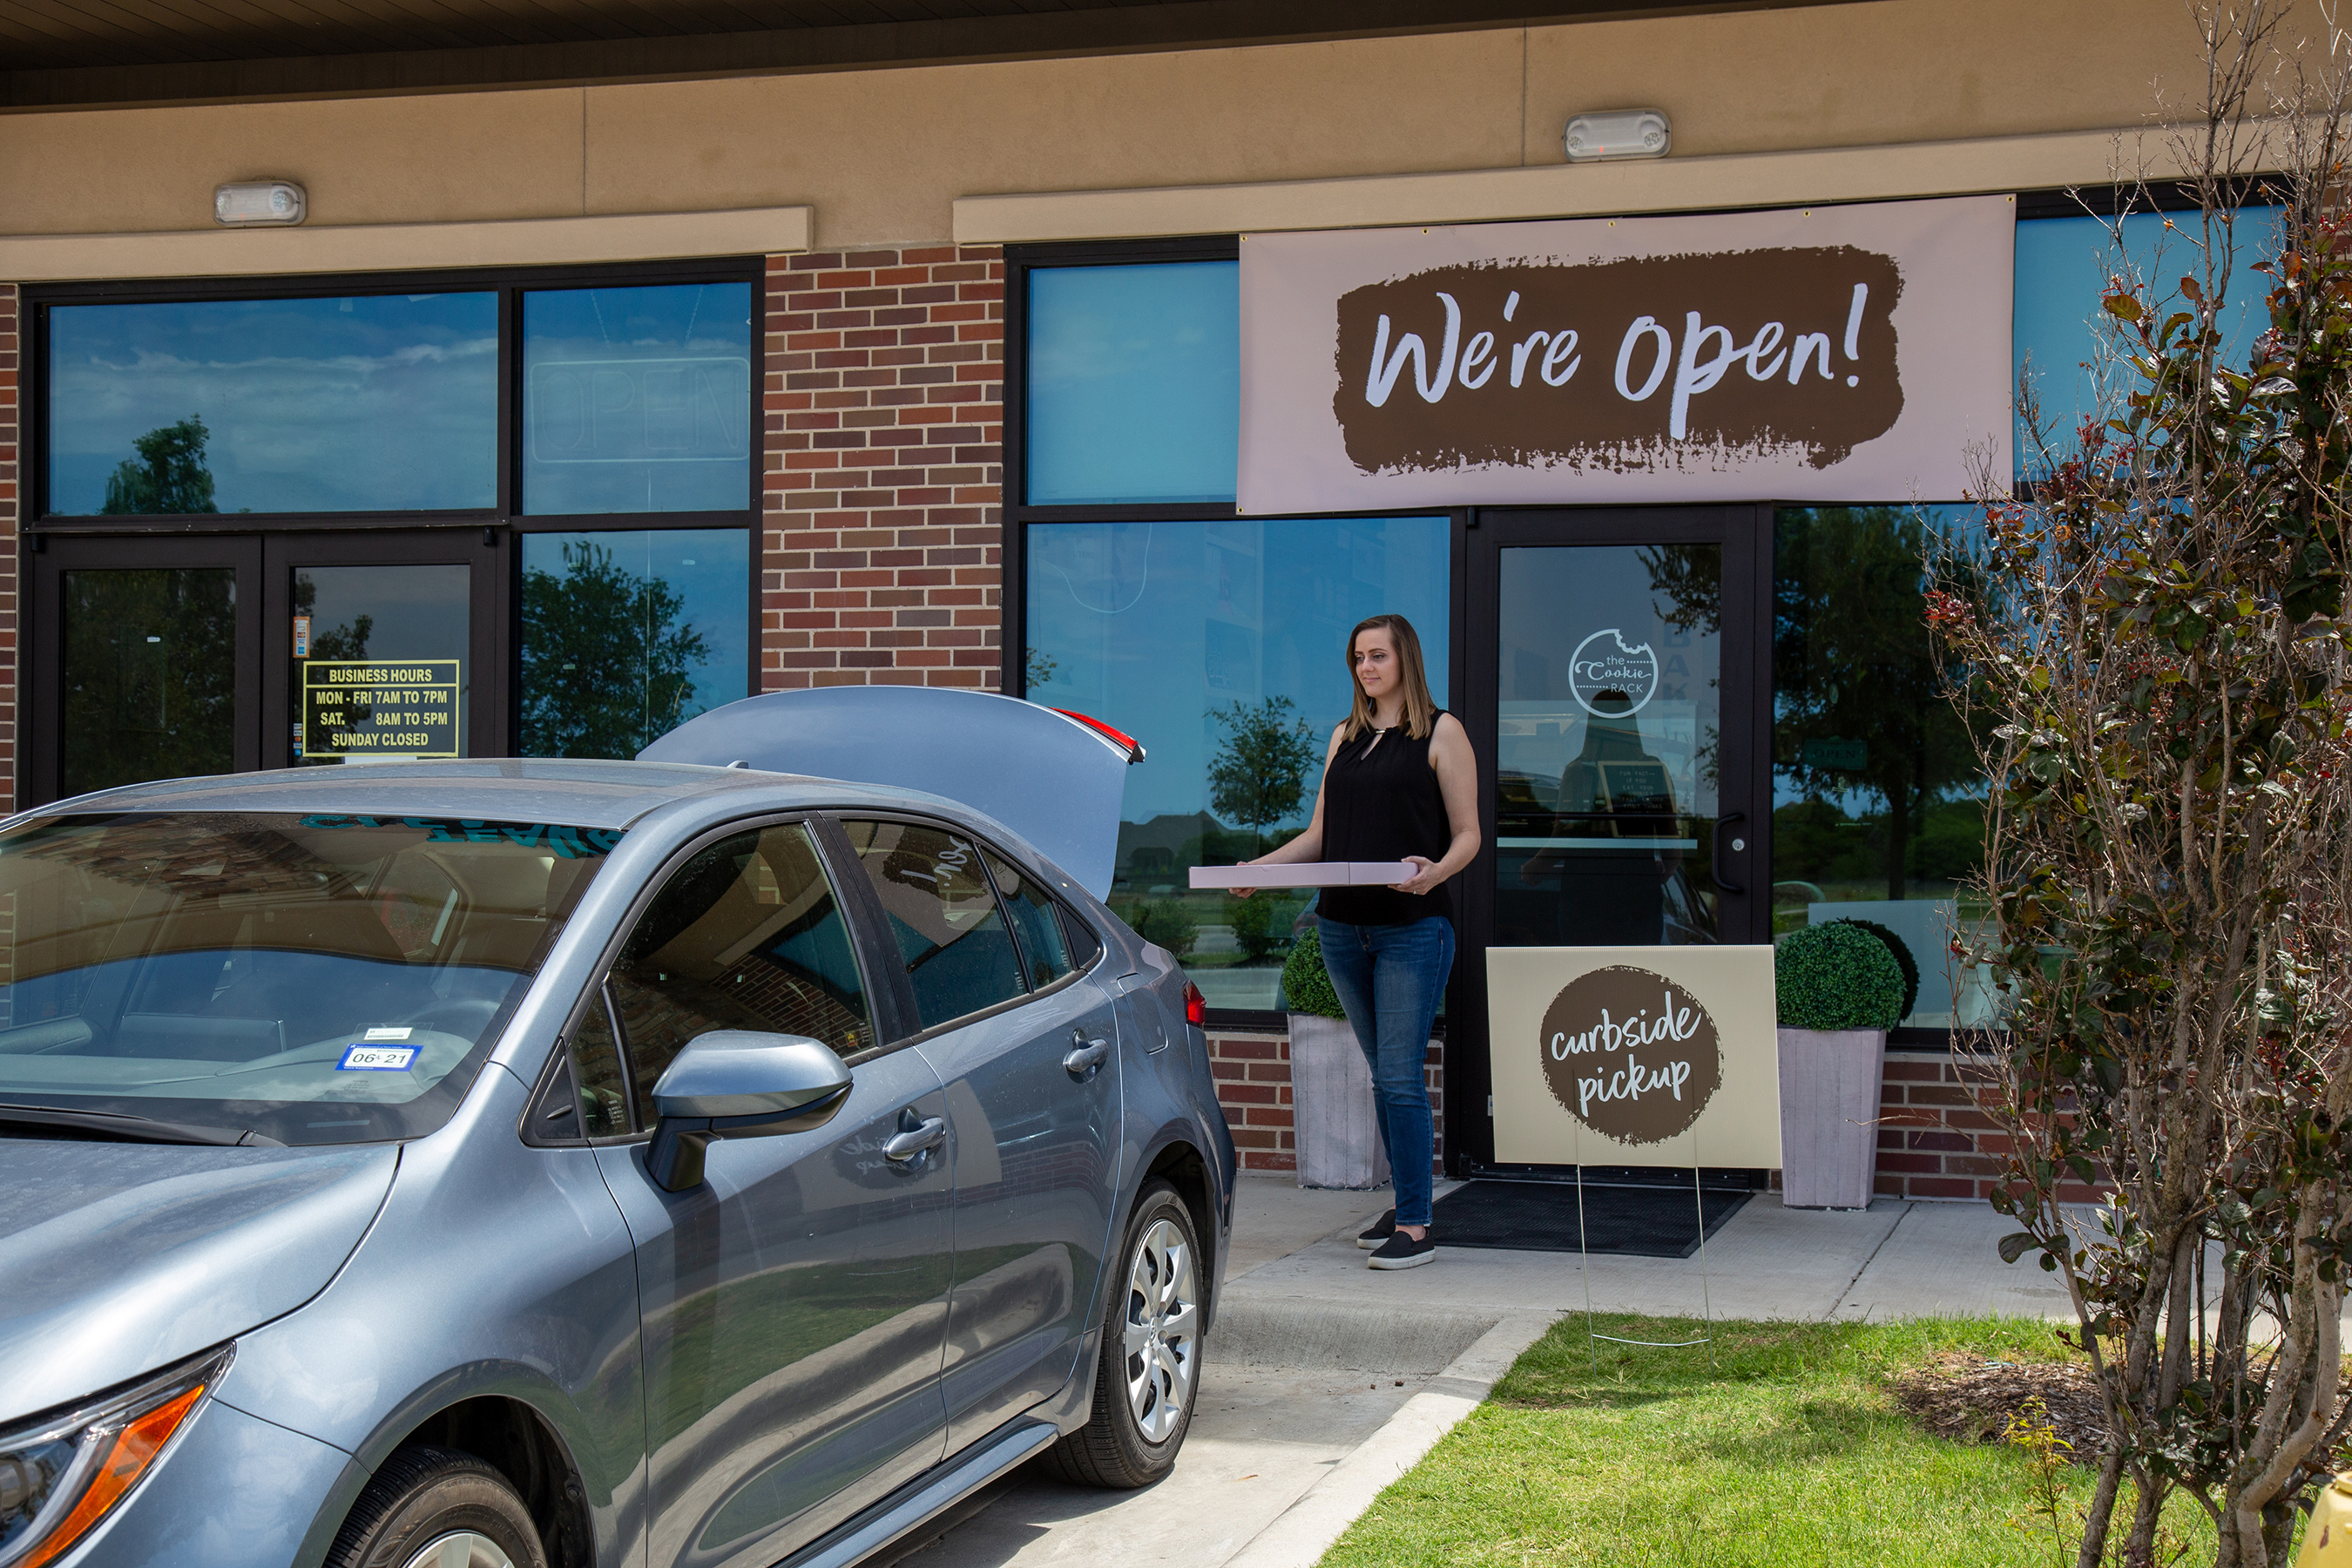 Rely on FedEx Office to help you reopen your business and let customers know you are ready to serve them with custom outdoor signage.